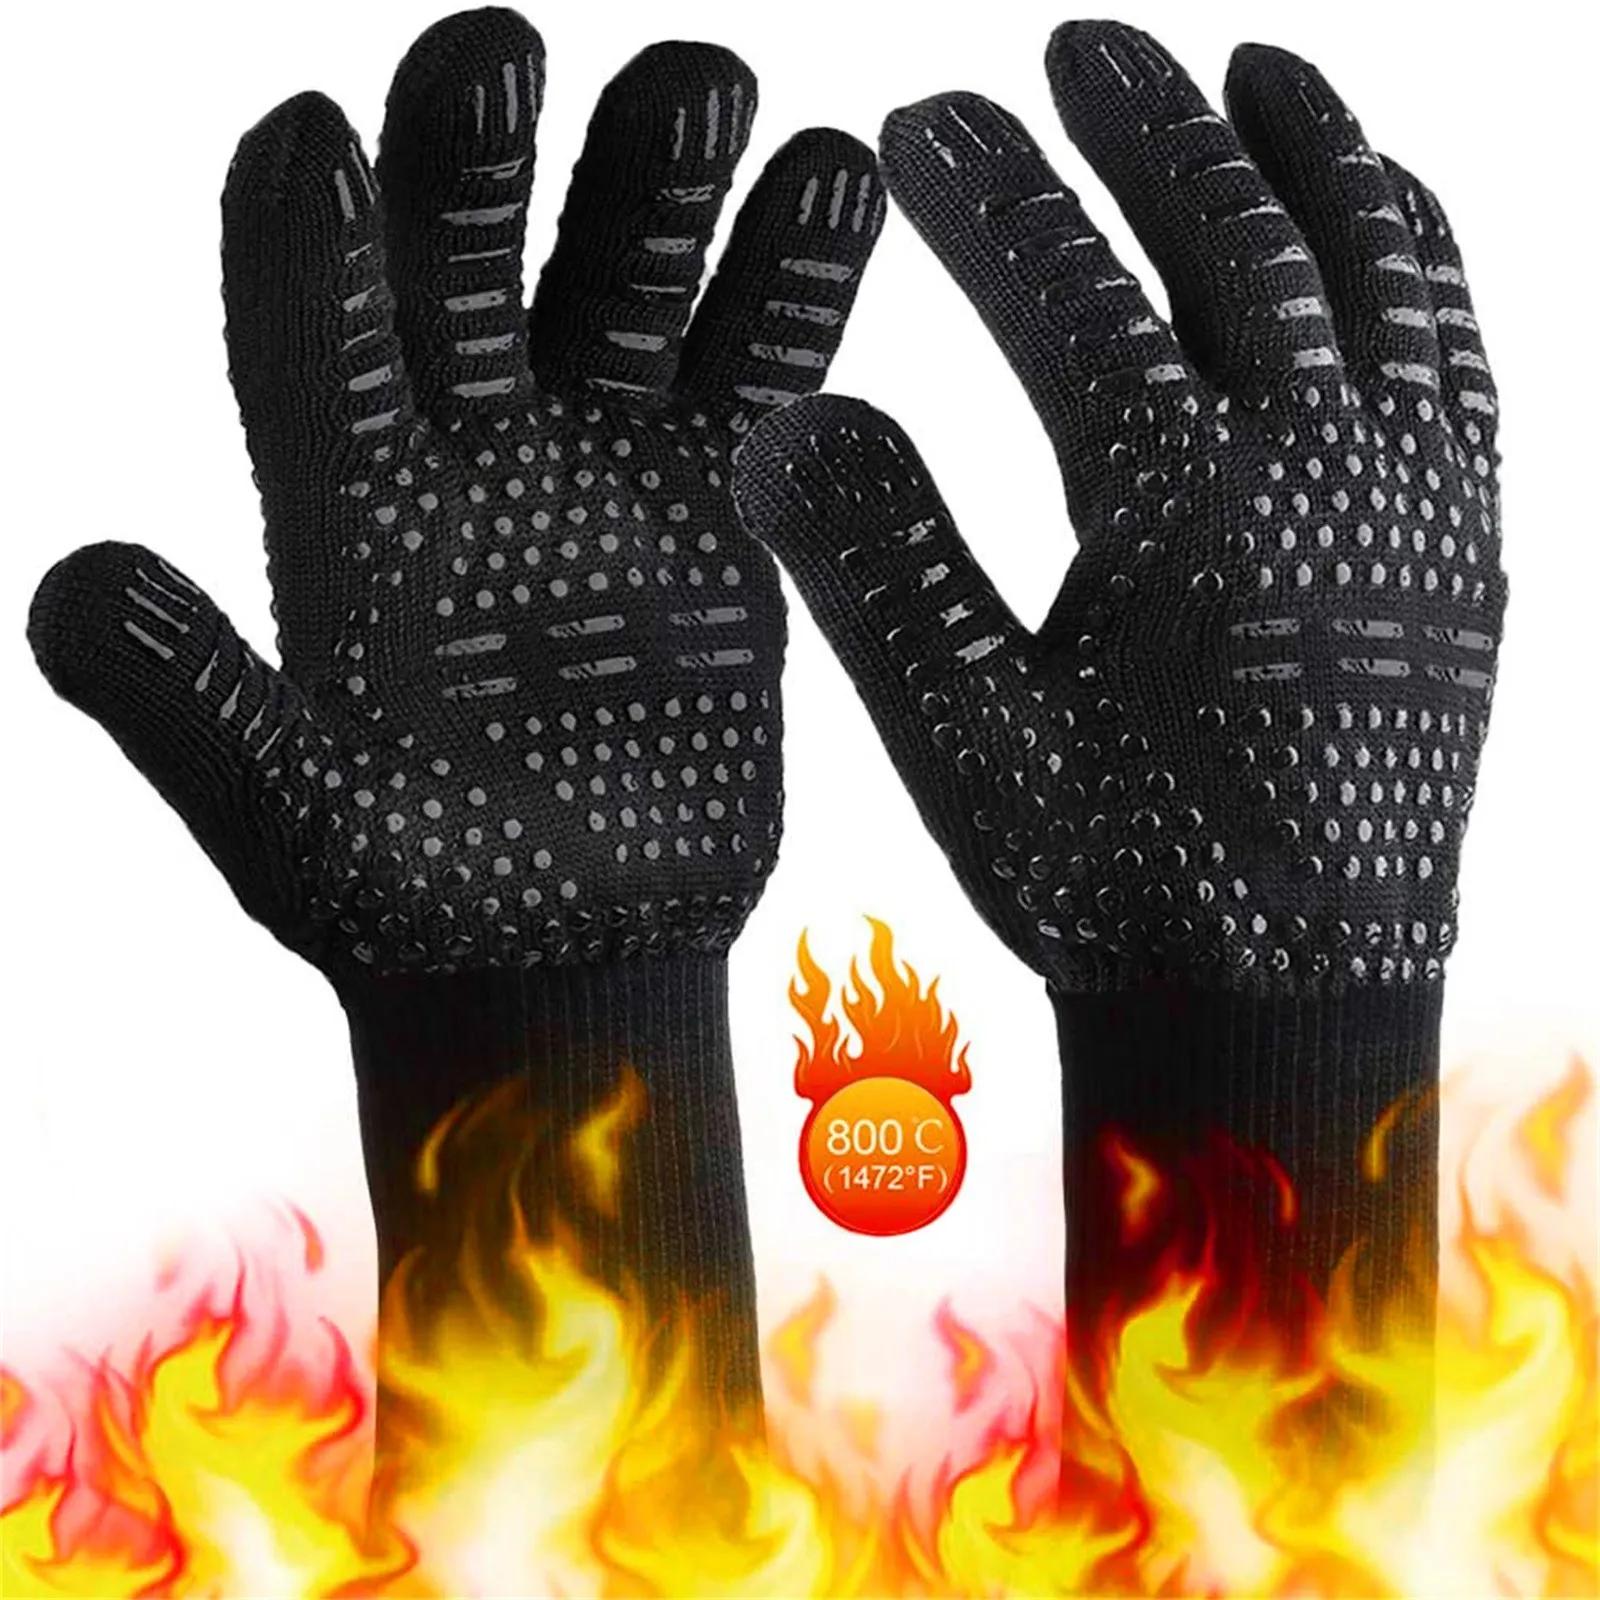 

Hot BBQ Grilling Cooking Gloves Extreme Heat Resistant Oven Welding Gloves High Quality Kitchen Barbecue Glove#45